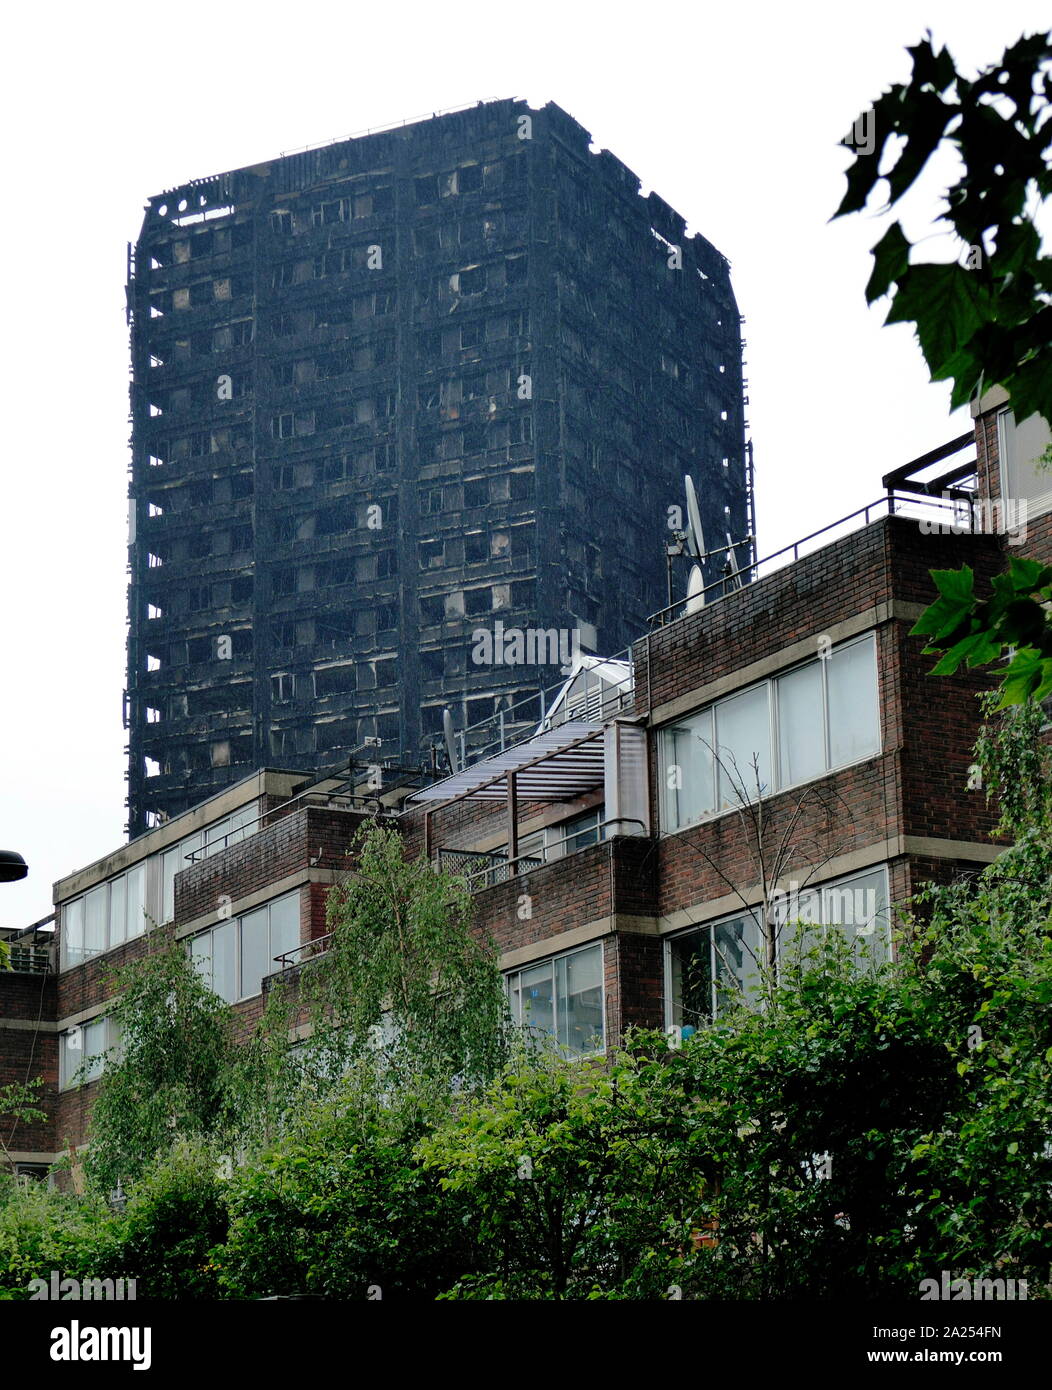 Grenfell Tower fire in London. A major fire occurred in the tower, on 14 June 2017. at the 24-storey Grenfell Tower block of public housing flats in North Kensington, West London. It caused at least 80 deaths and over 70 injuries. The rapid growth of the fire is thought to have been accelerated by the building's exterior cladding, which is of a common type in widespread use. Stock Photo